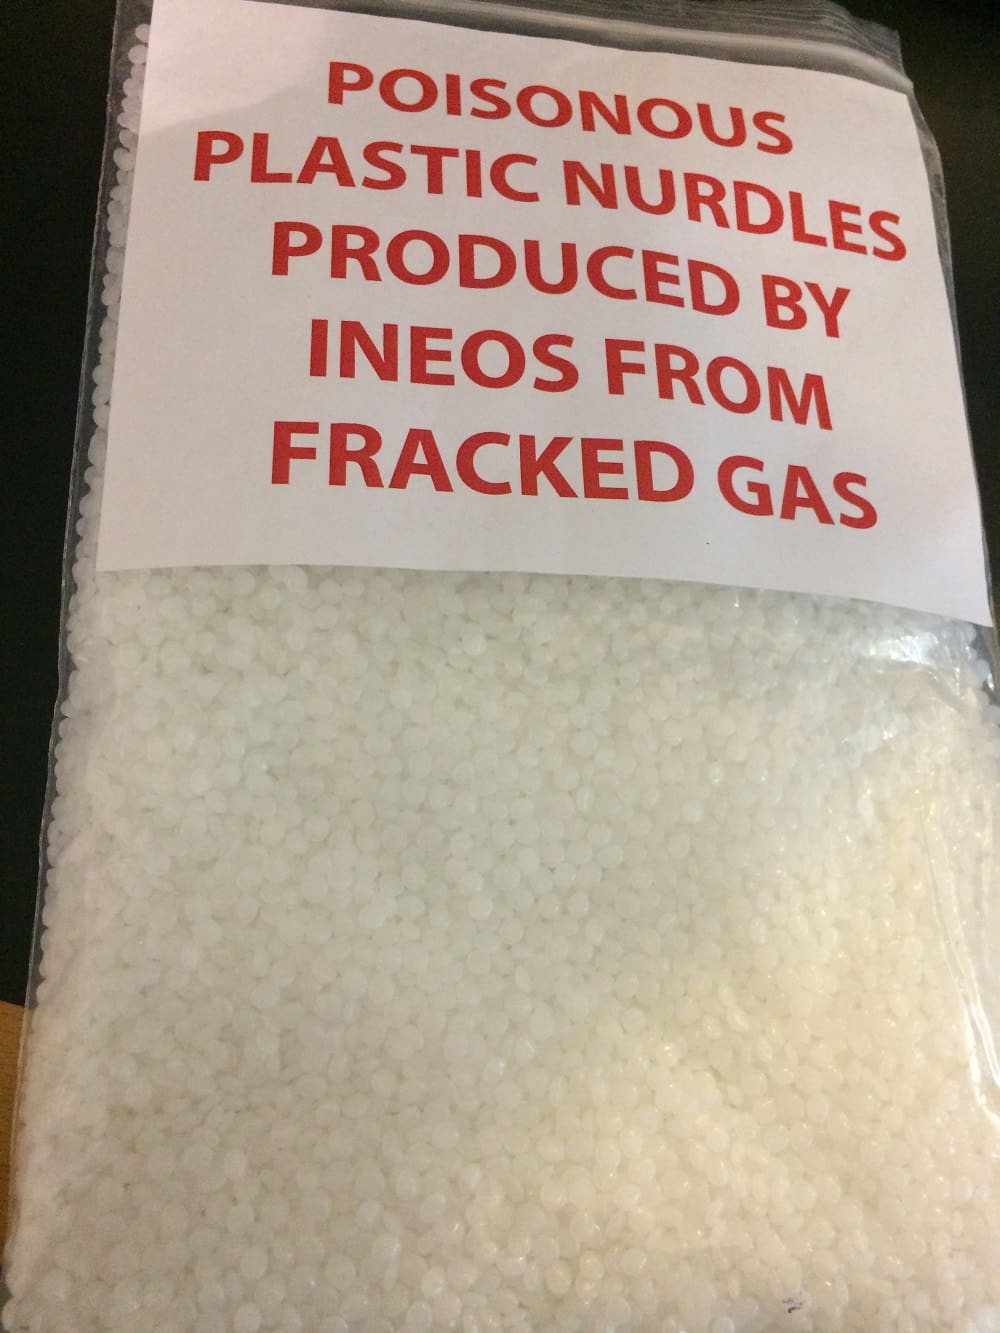 Poisonous plastic nurdles produced by INEOS fracked gas